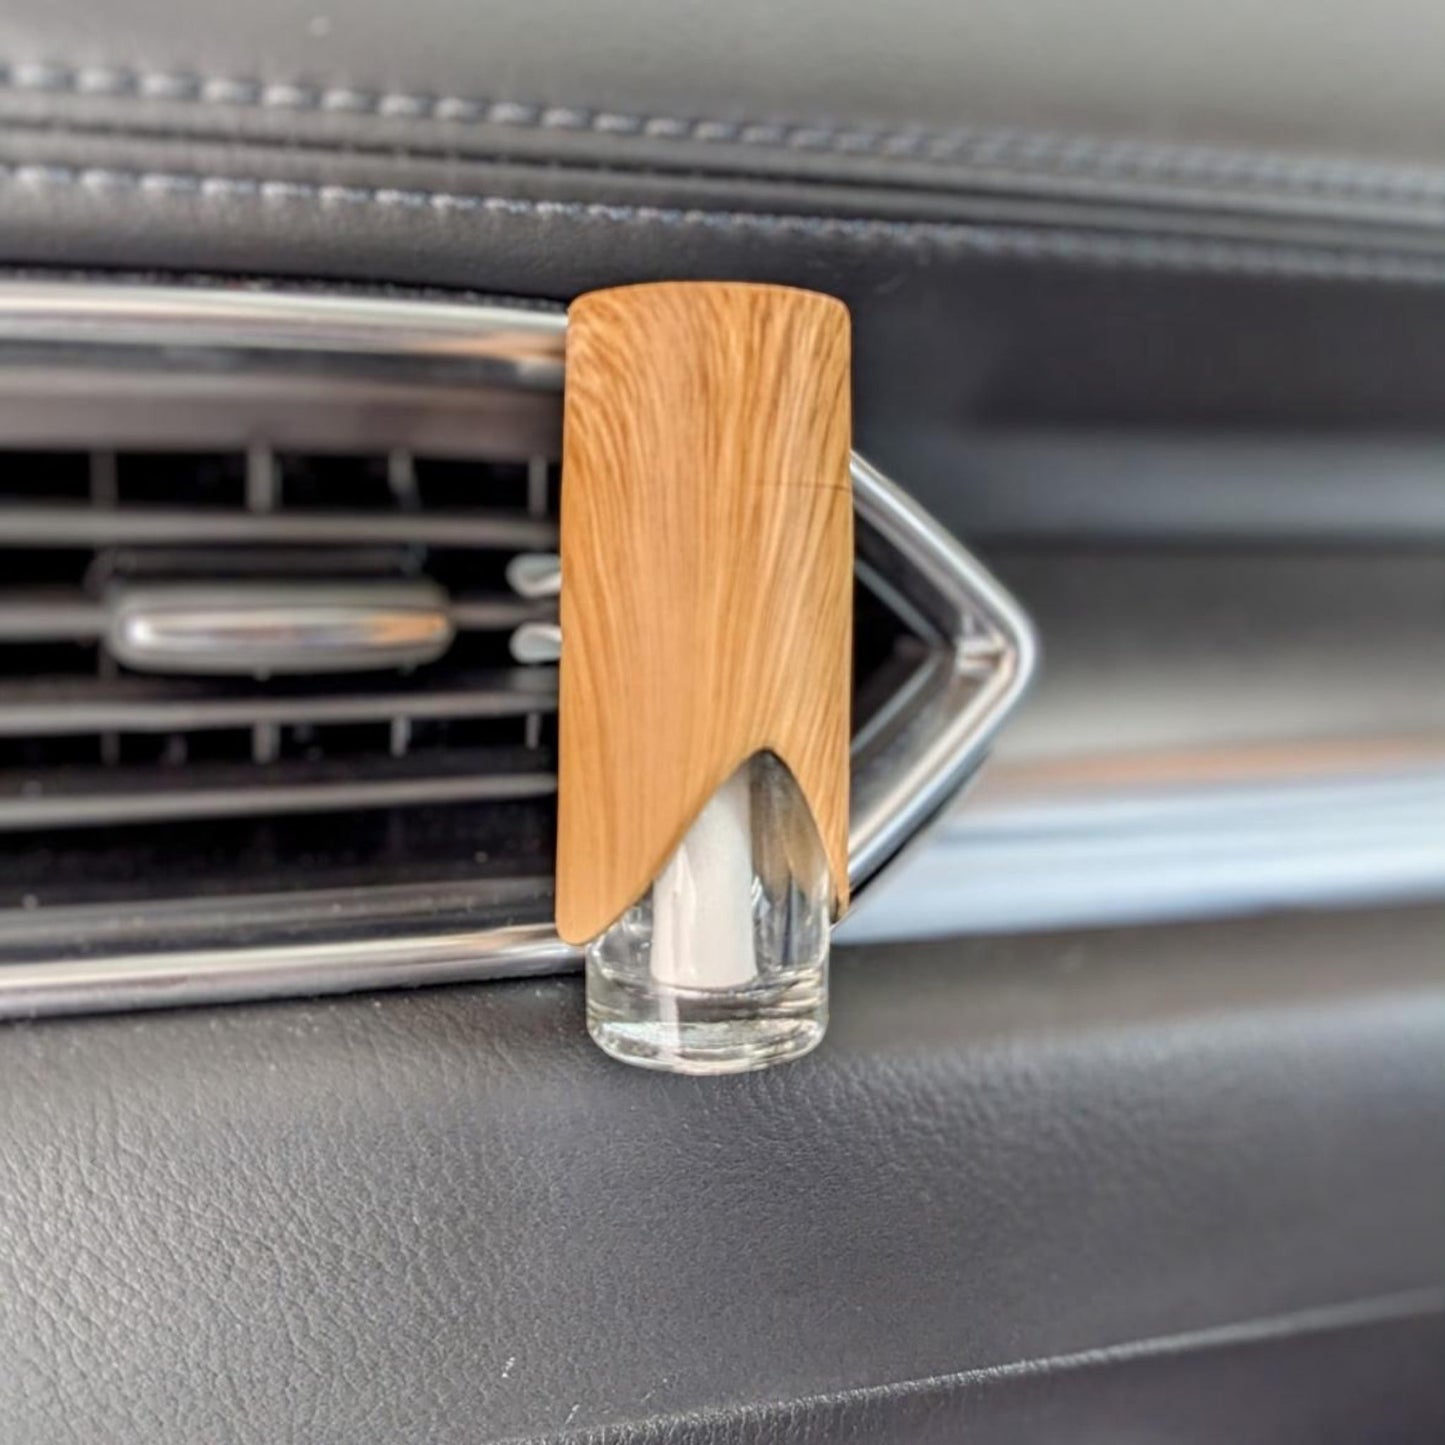 Clip-on Car Diffuser - fragrance Refill ONLY